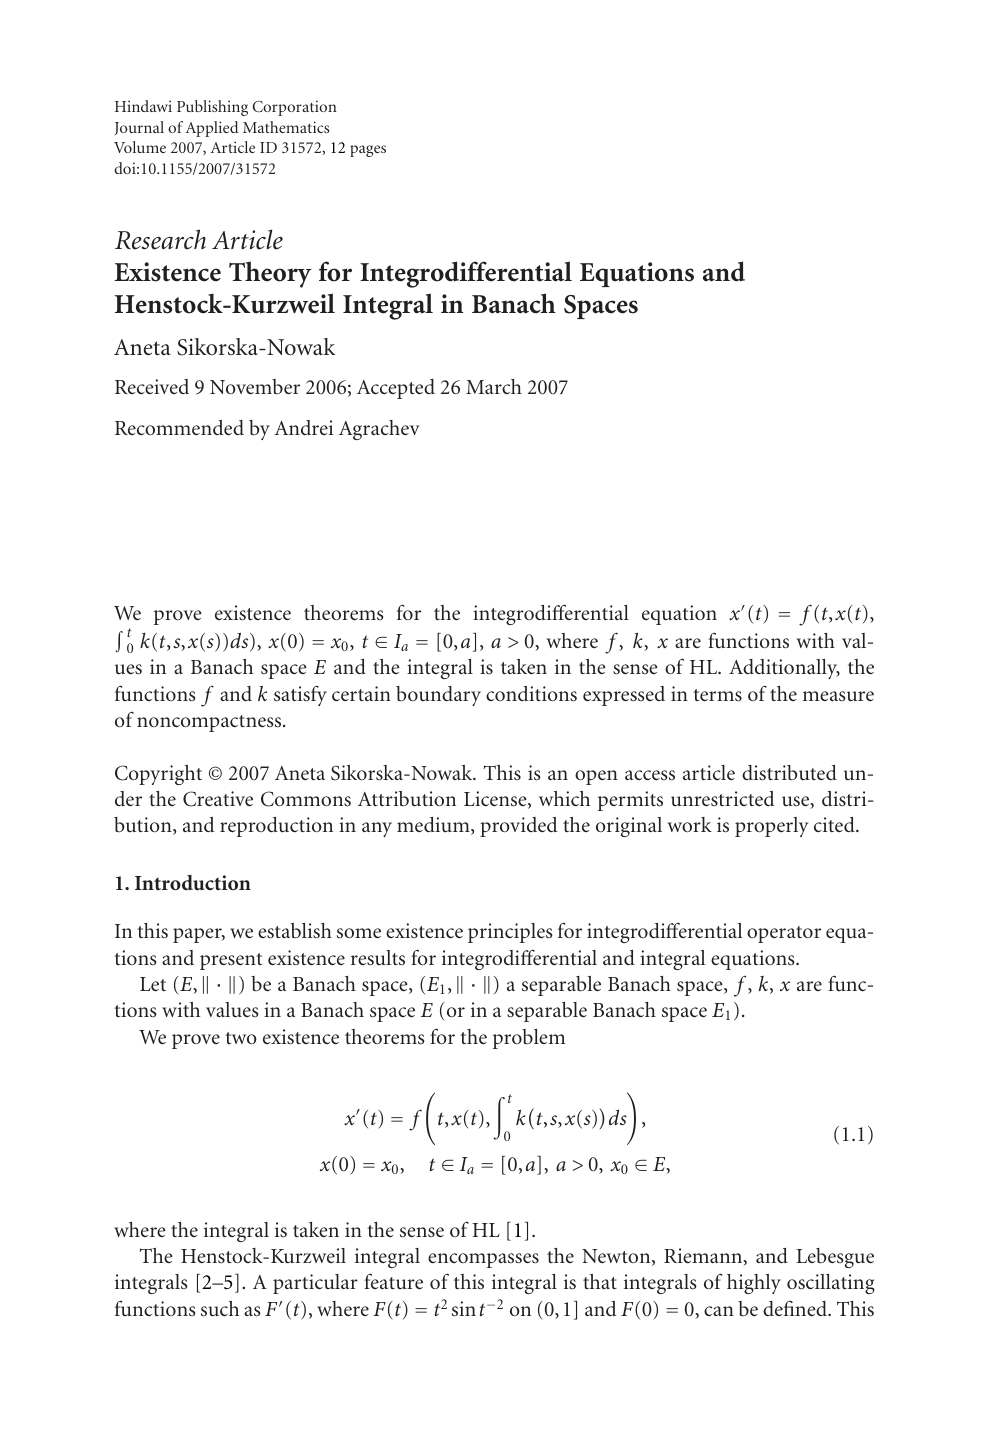 Existence Theory For Integrodifferential Equations And Henstock Kurzweil Integral In Banach Spaces Topic Of Research Paper In Mathematics Download Scholarly Article Pdf And Read For Free On Cyberleninka Open Science Hub